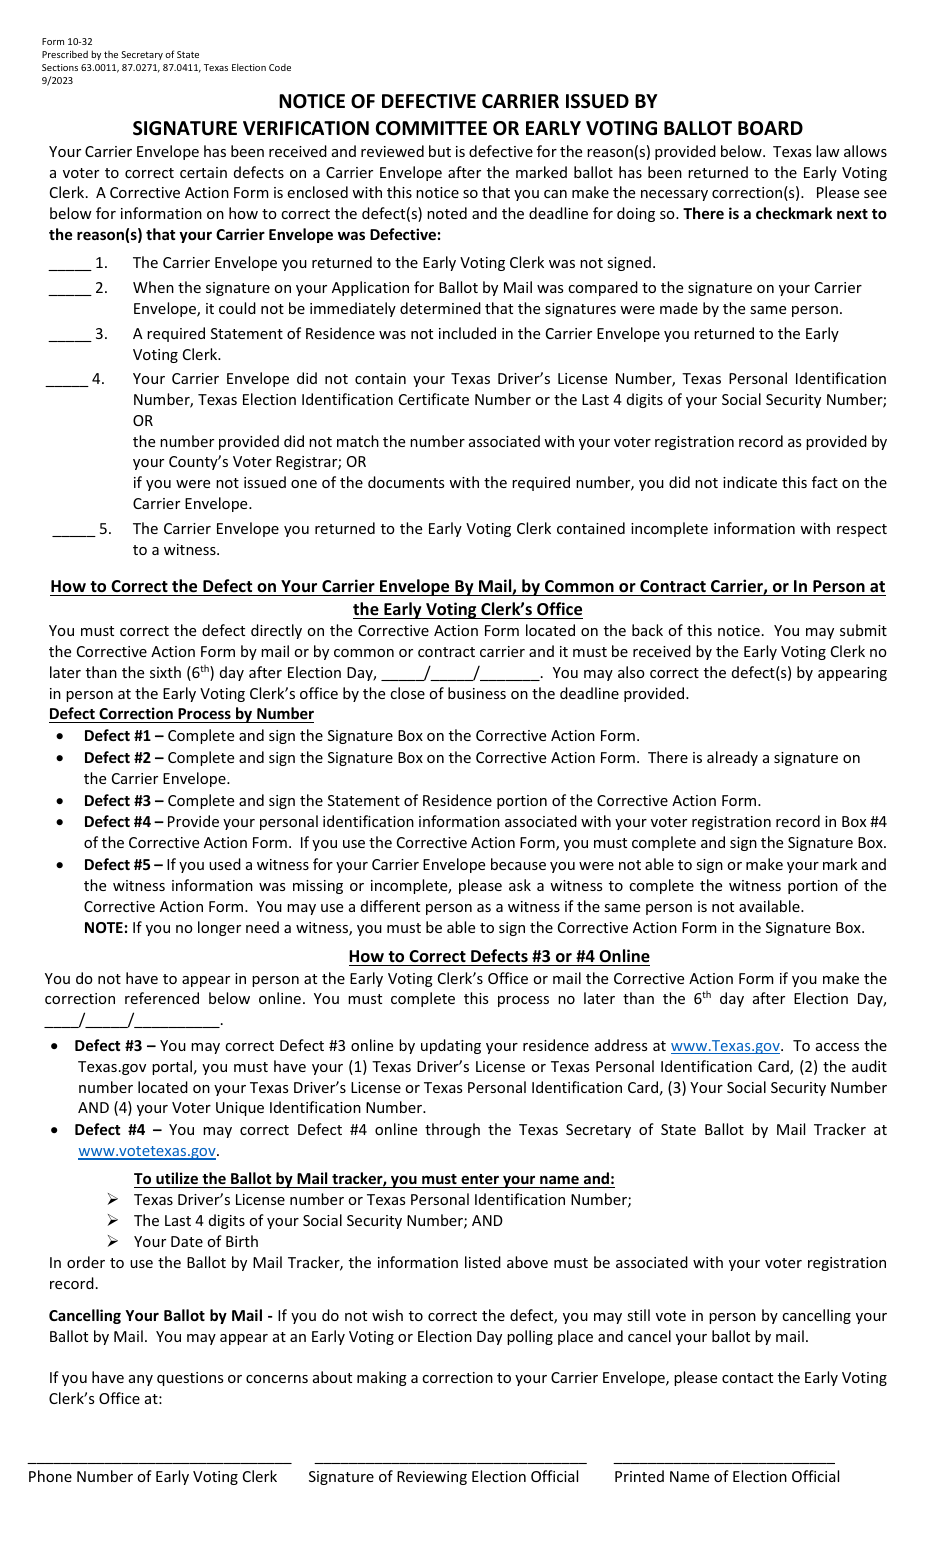 Form 10-32 Notice of Defective Carrier Issued by Signature Verification Committee or Early Voting Ballot Board - Texas (English / Spanish), Page 1